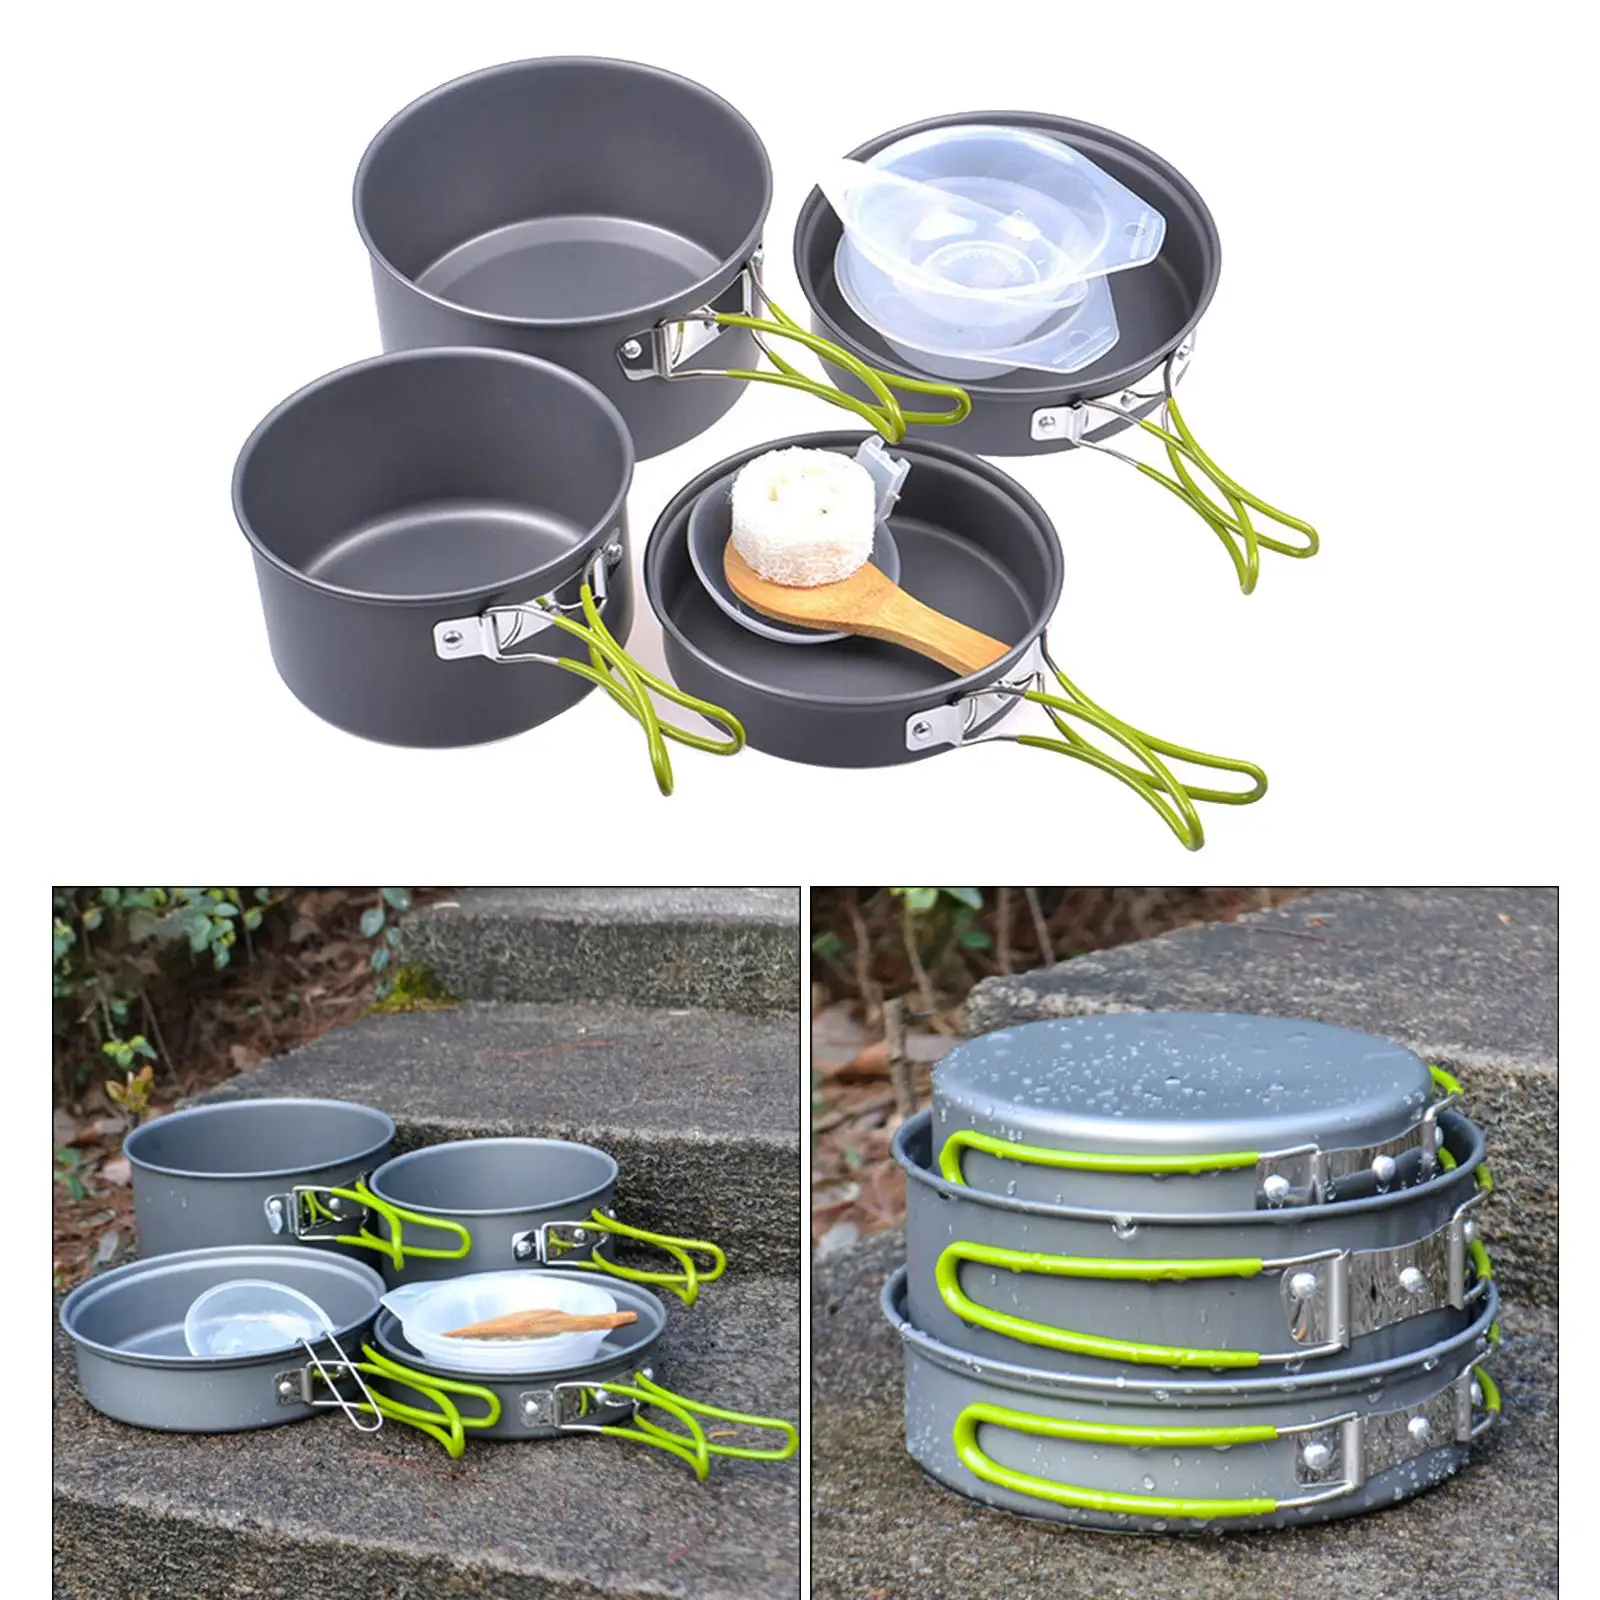 11in1 Portable Outdoor Camping Cookware Kit Hiking Lightweight Aluminium Cooking Spoon Set Backpacking Gear